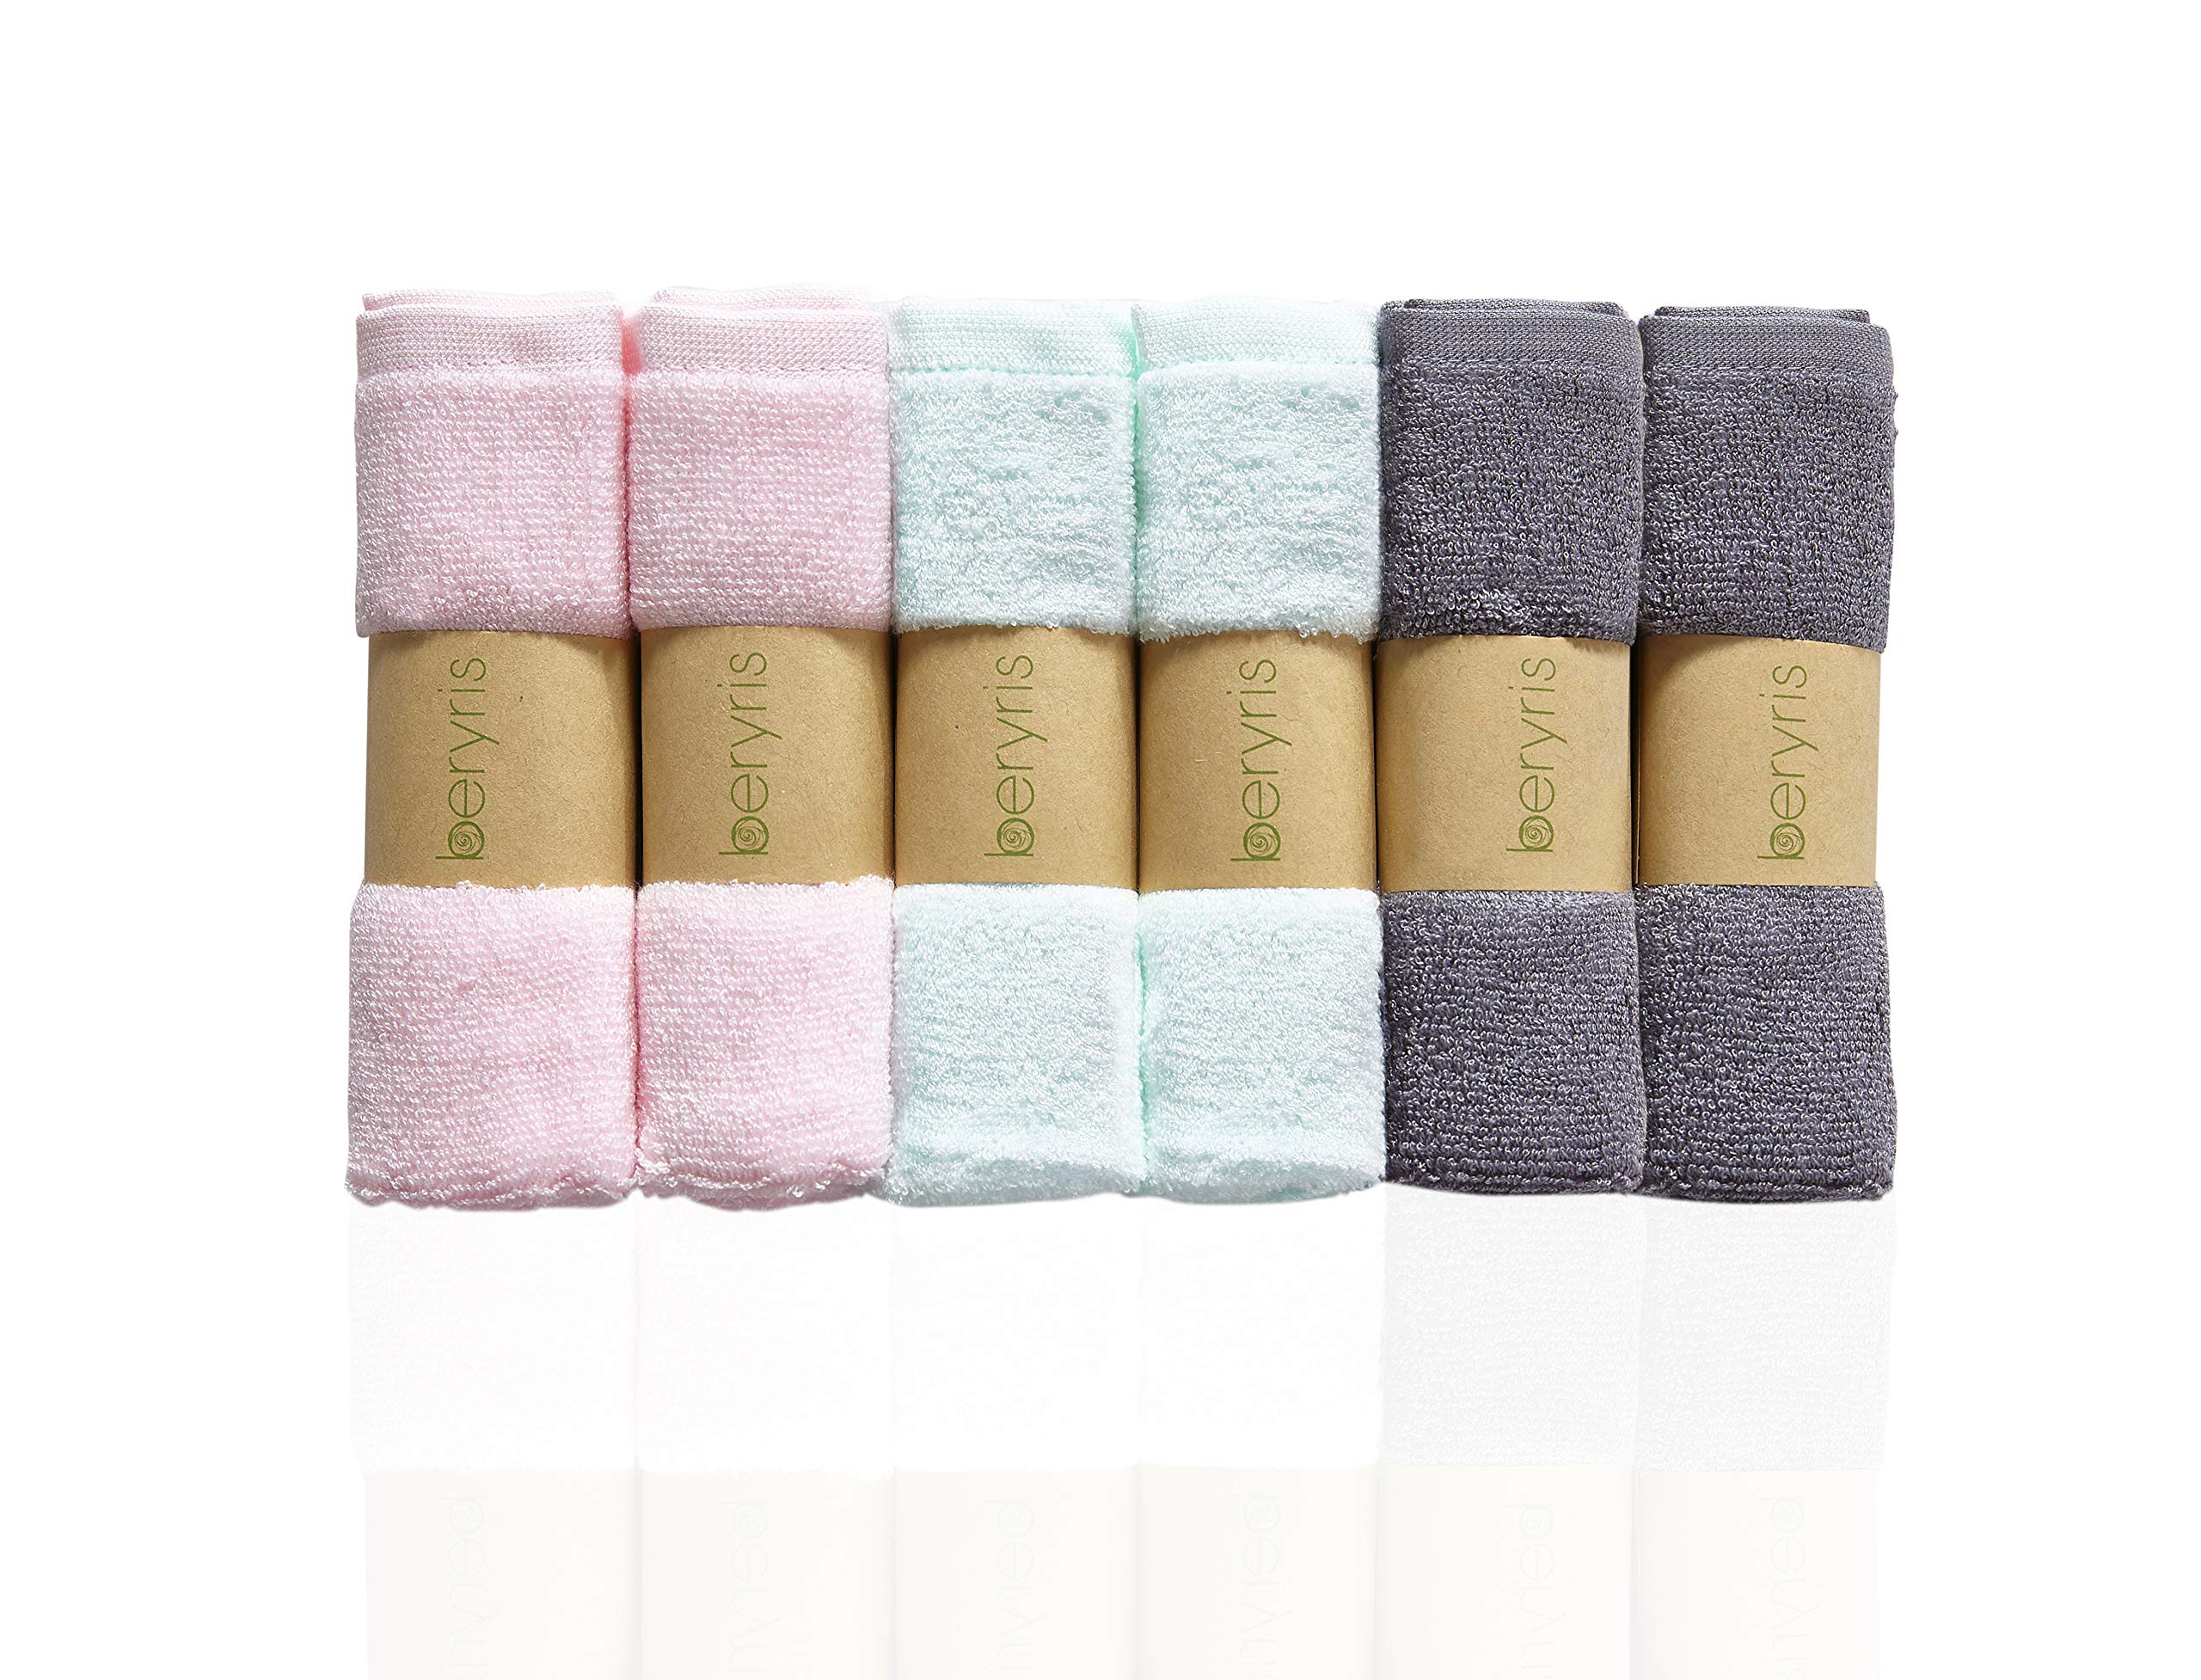 Bamboo Washcloths (6-Pack) -Baby Washcloth Ultra-Soft & Absorbent Towels for Baby's Sensitive Skin - Size 10"x10" Wipes - Baby Registry Gift- Naturally Antibacterial Adult Flannel